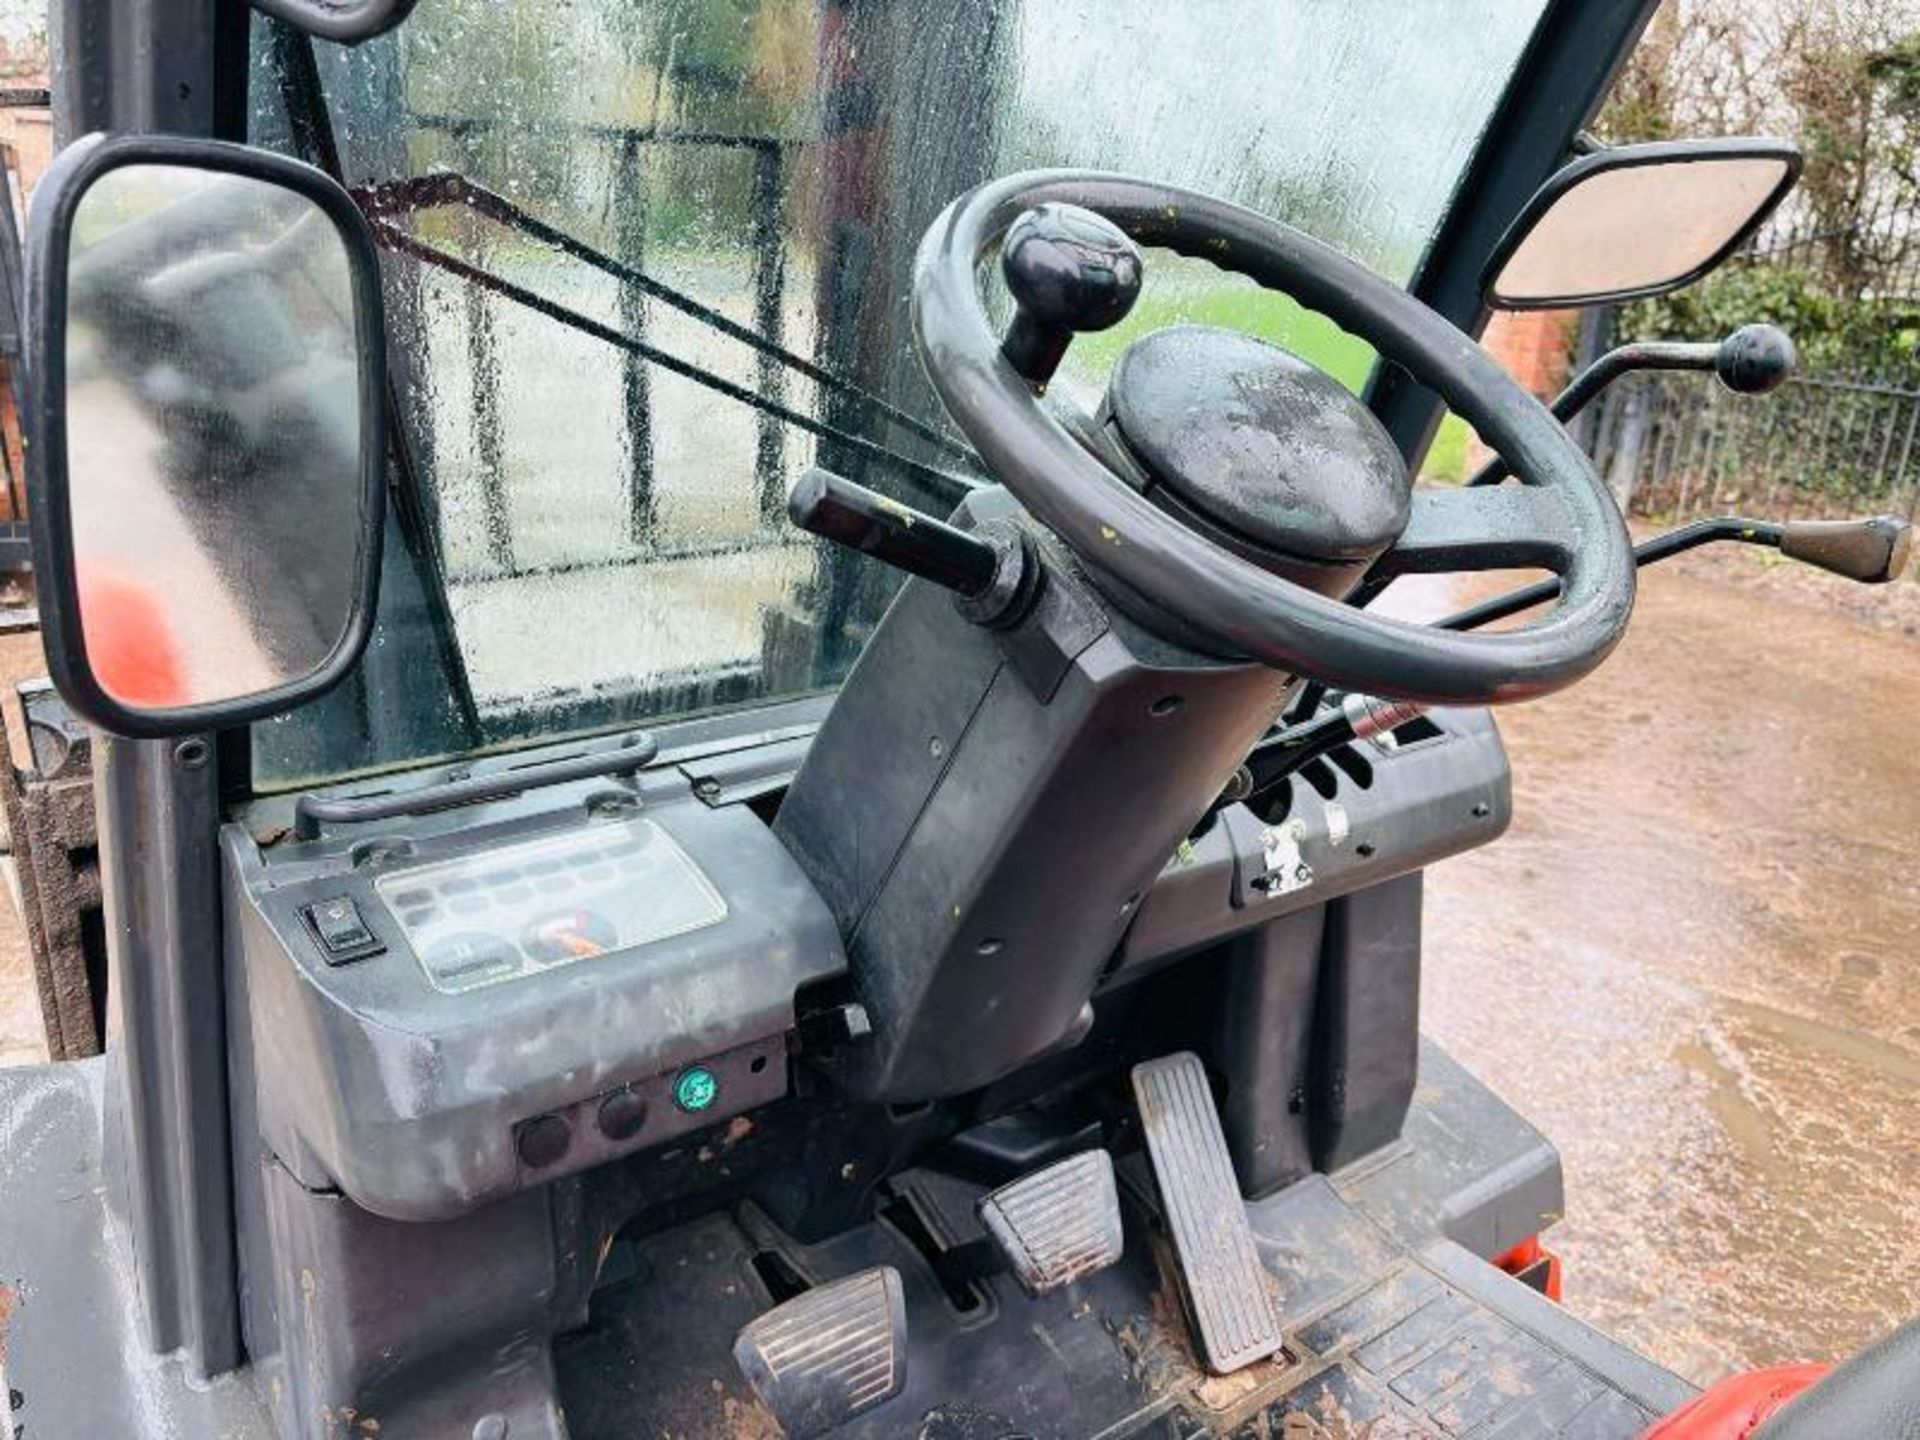 NISSAN A30PQ FORKLIFT *3 TON LIFT* C/W SIDE SHIFT & PALLET TINES - Image 6 of 13